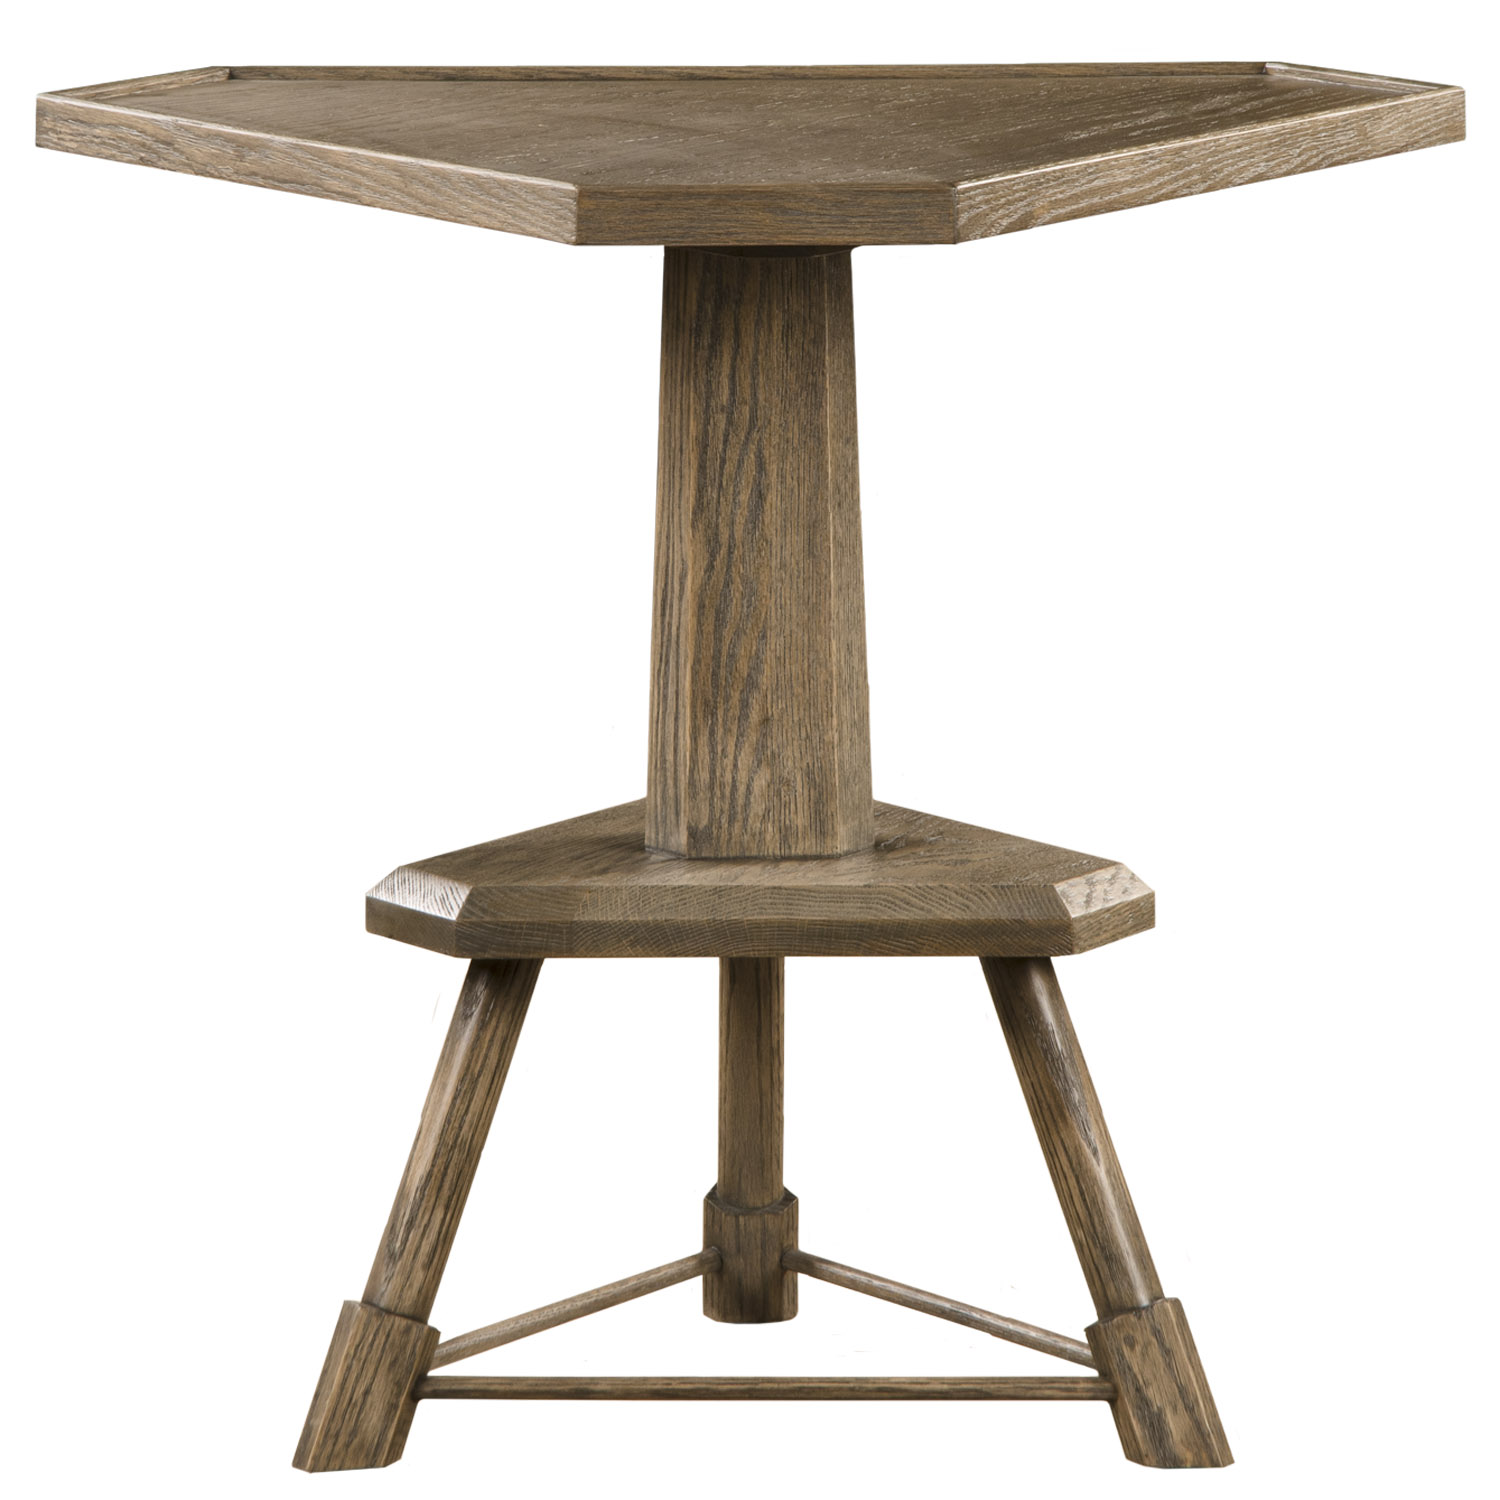 Stroud unique triangular contemporary traditional transitional triangle wire-brushed oak side end table by Woodland furniture in Idaho Falls